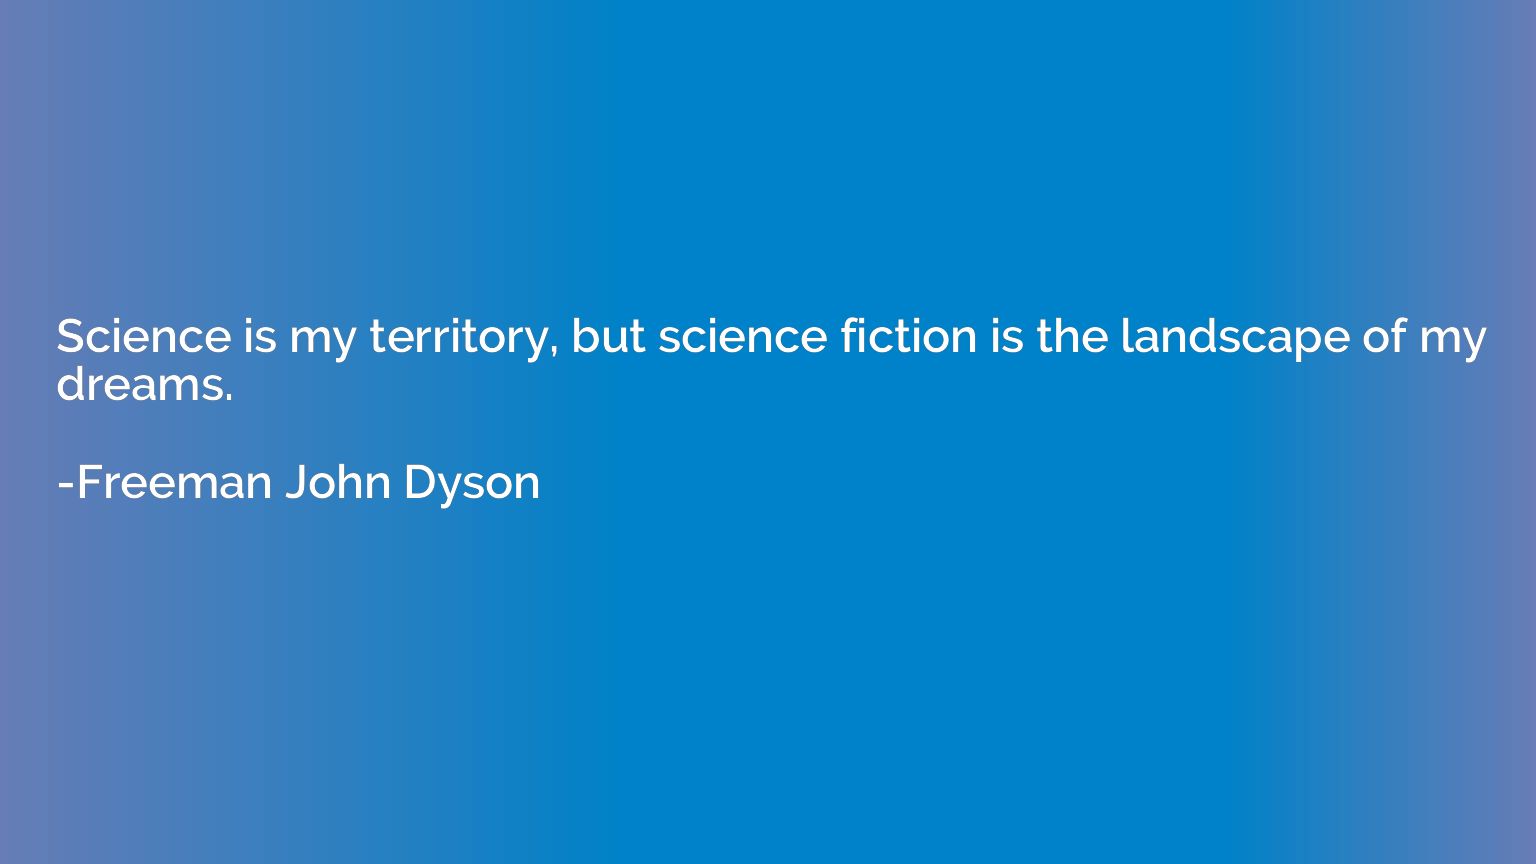 Science is my territory, but science fiction is the landscap